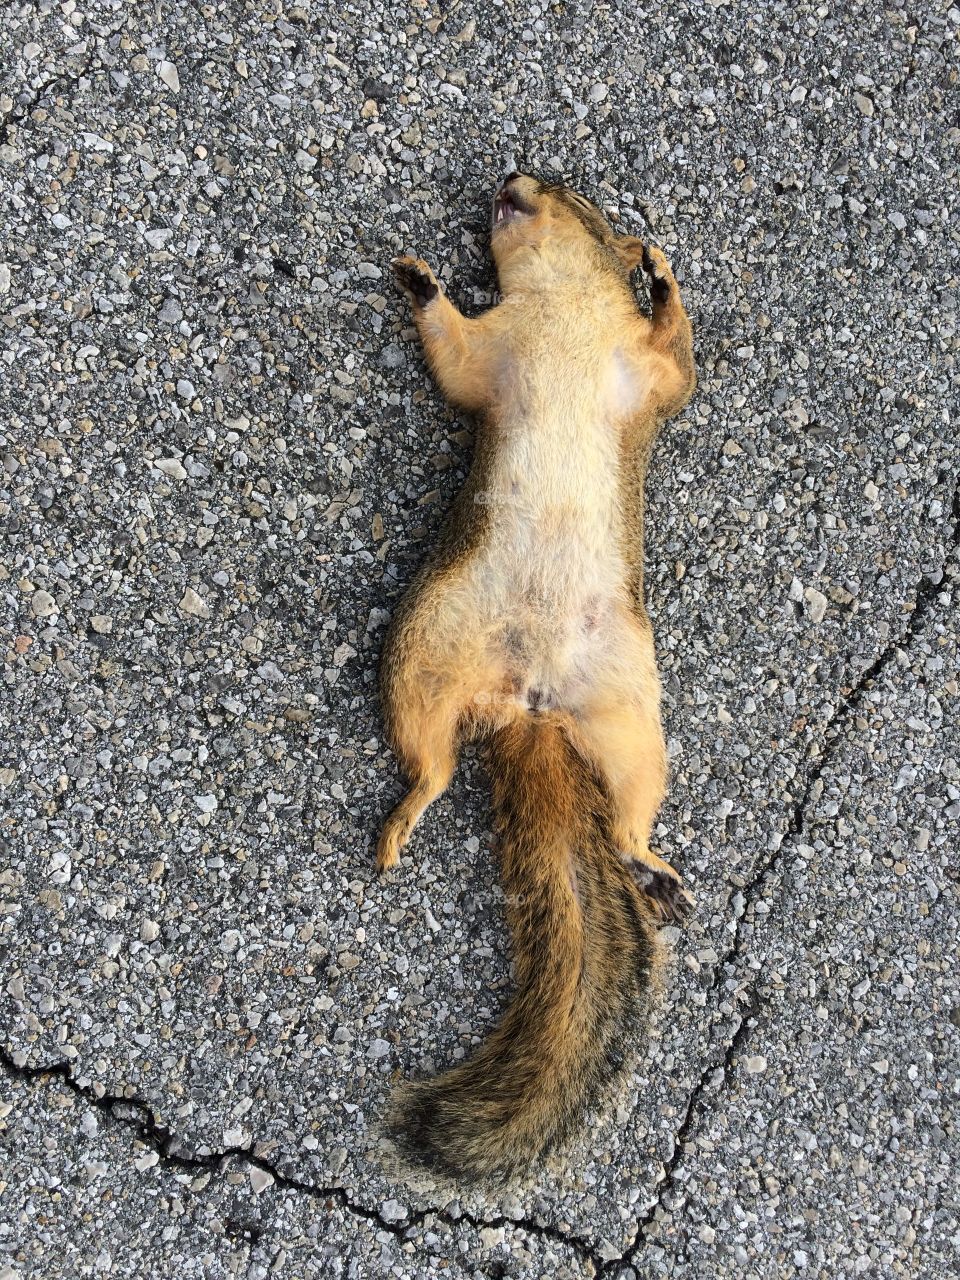 Napping squirrel . Picture of a dead squirrel in the street